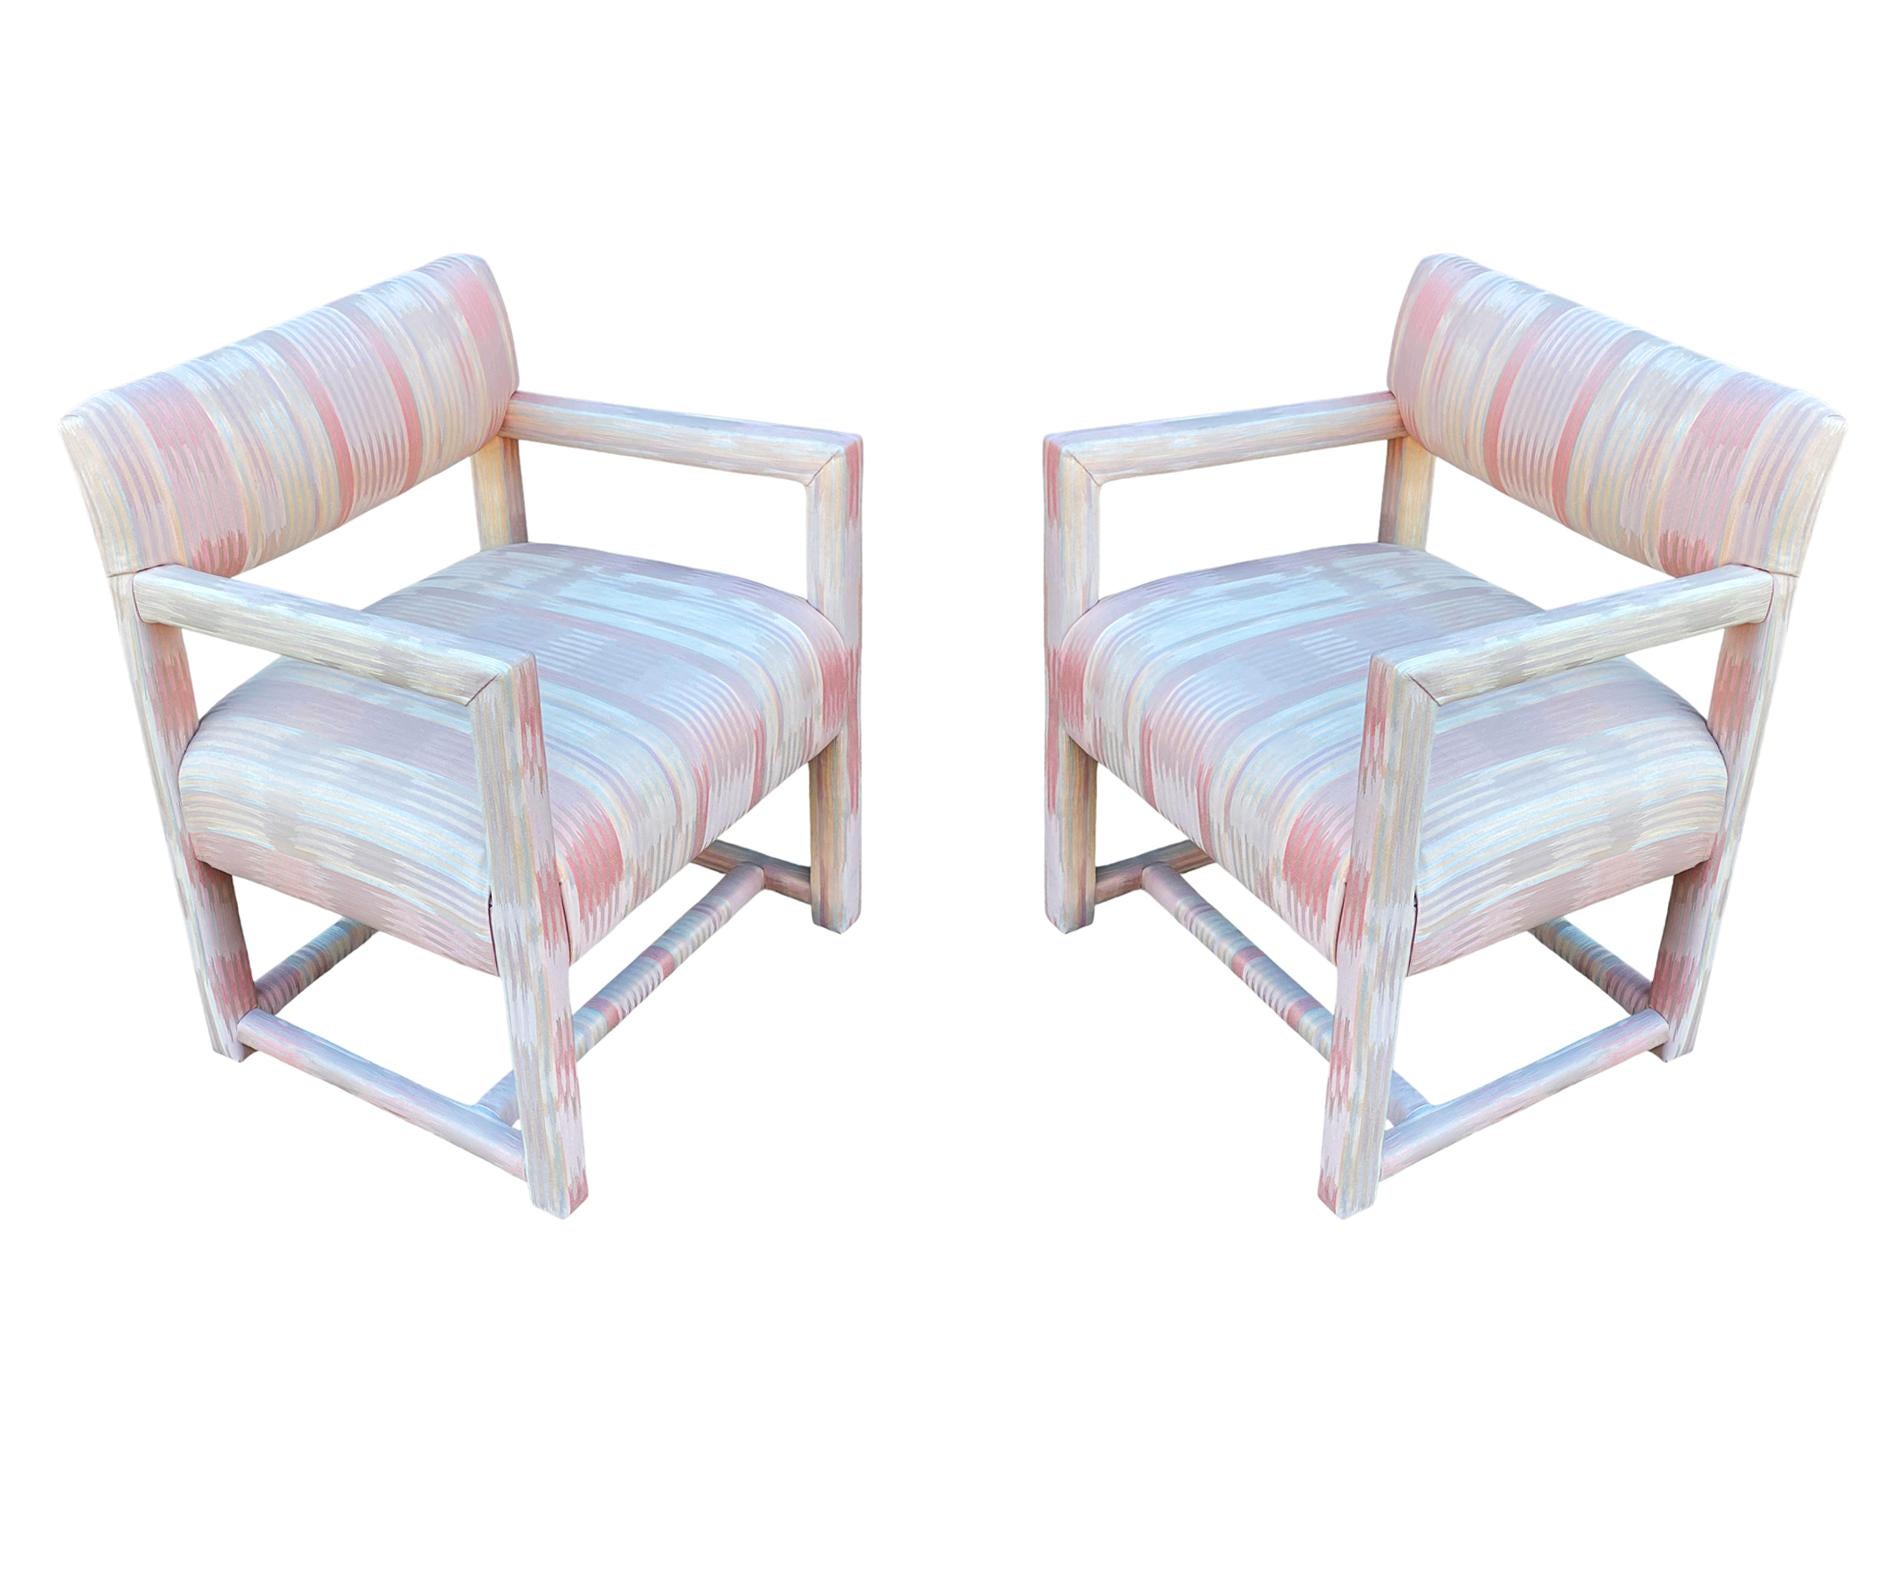 Pair of Mid-Century Modern Parsons Armchair Lounge Chairs after Milo Baughman For Sale 4